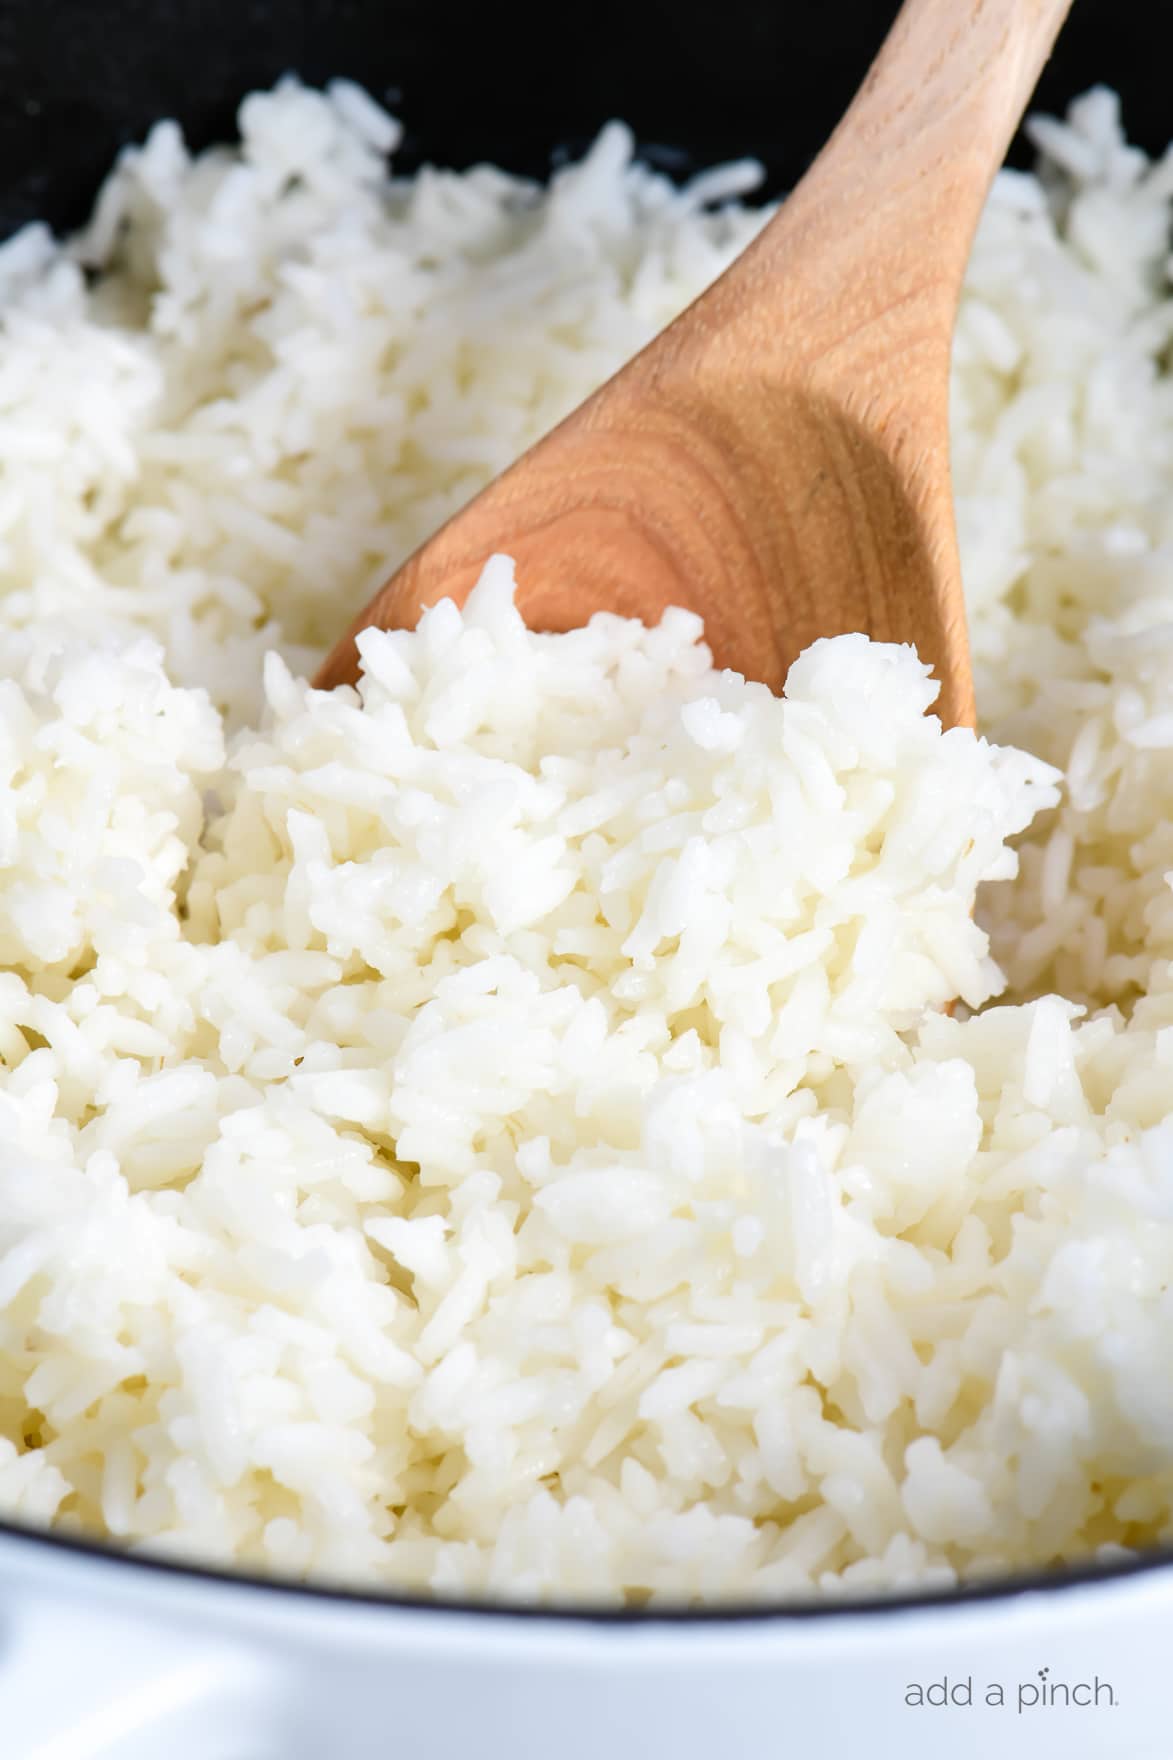 https://addapinch.com/wp-content/uploads/2019/09/how-to-cook-white-rice-recipe-2669.jpg